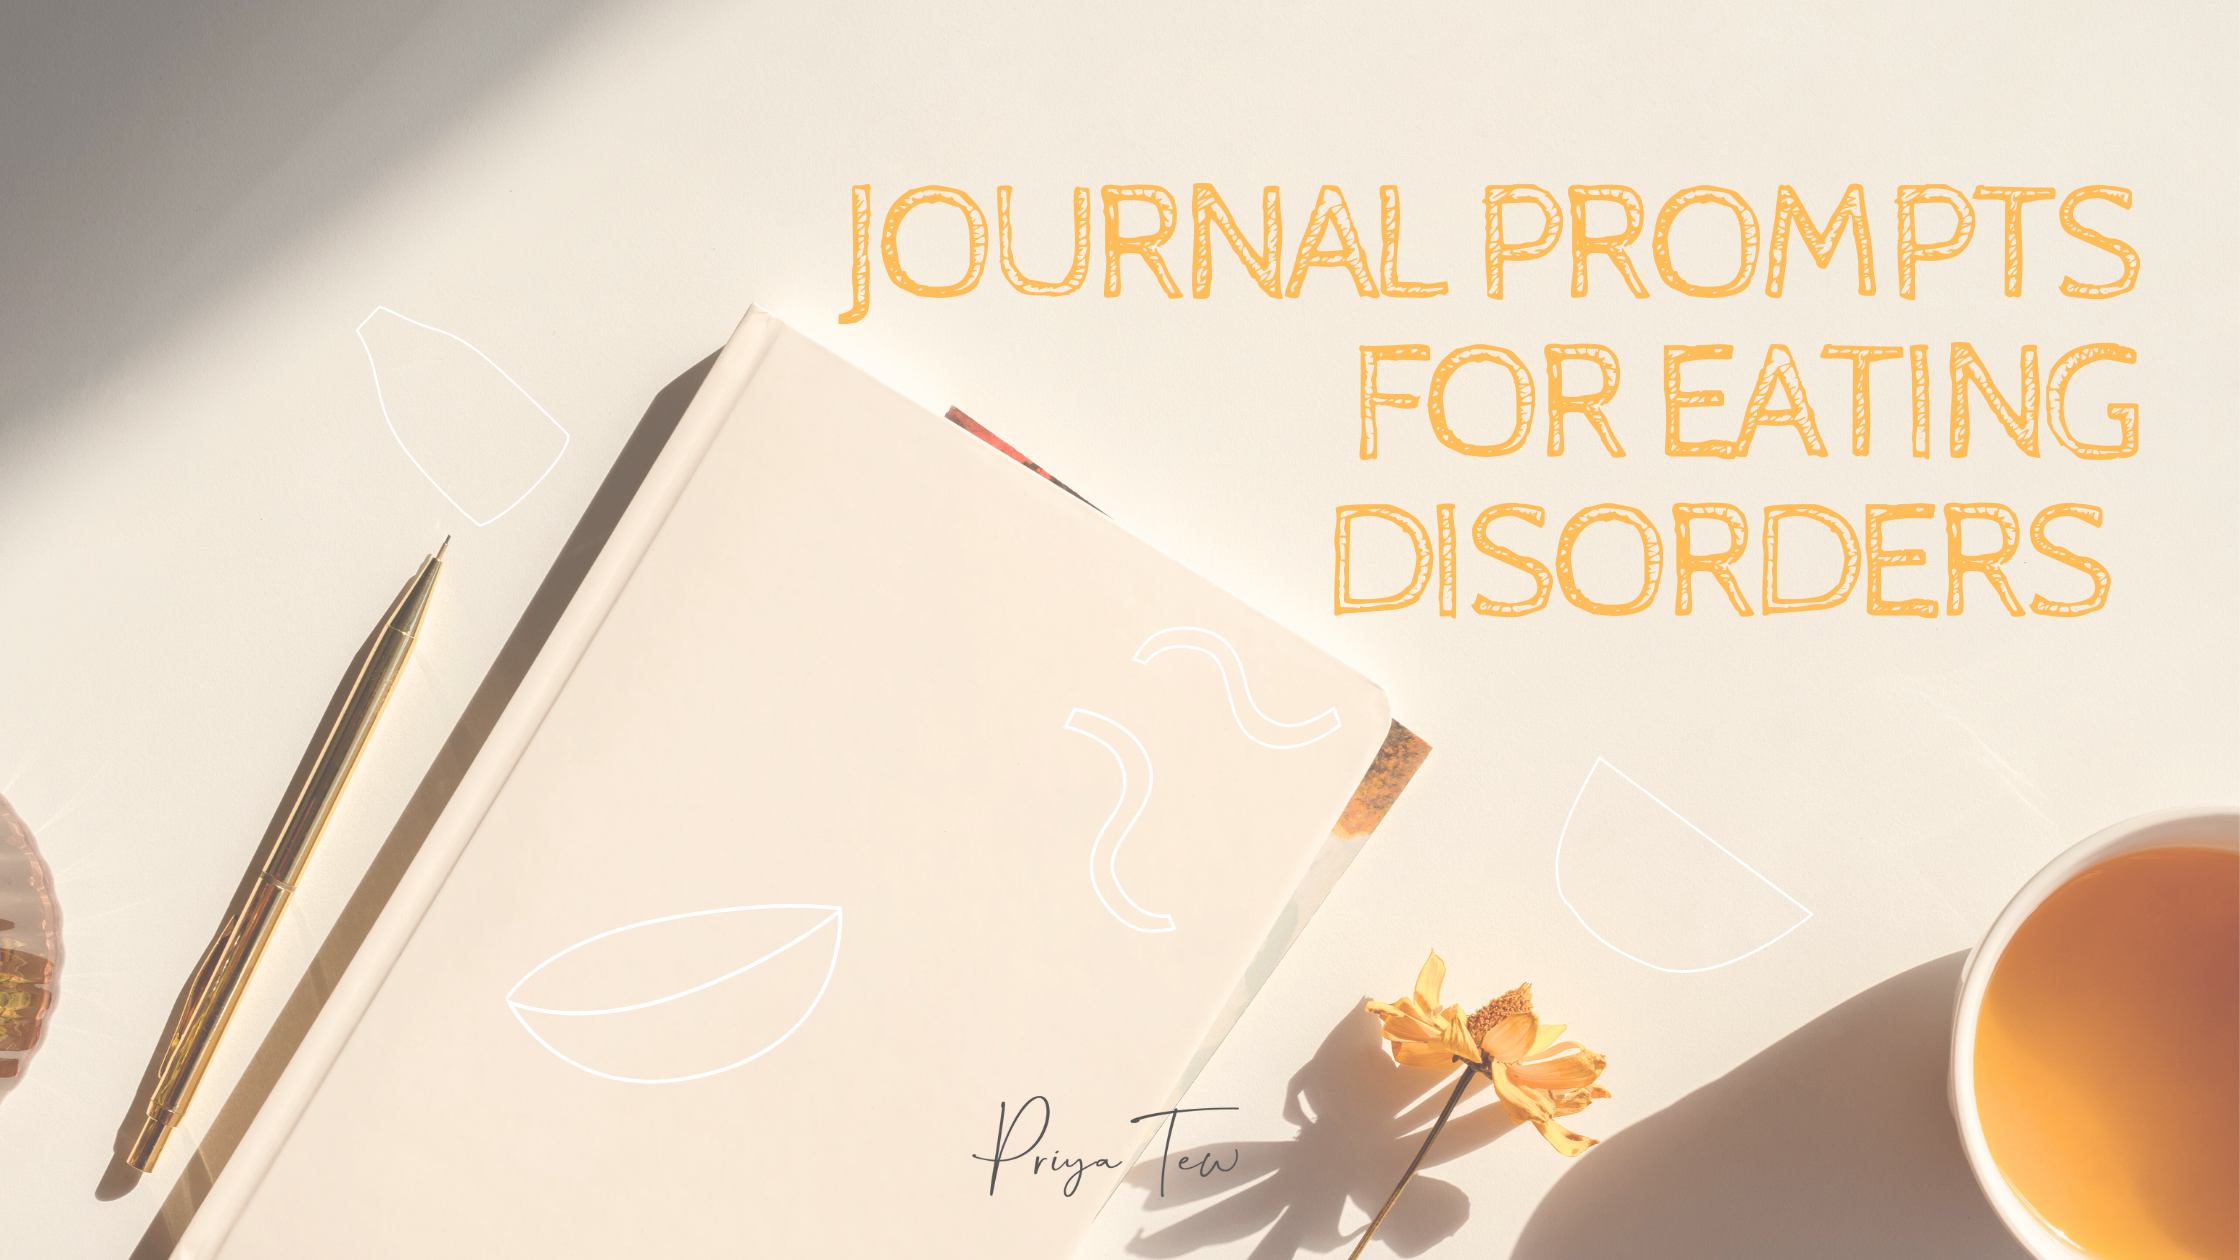 Daily journal prompts image with notebook